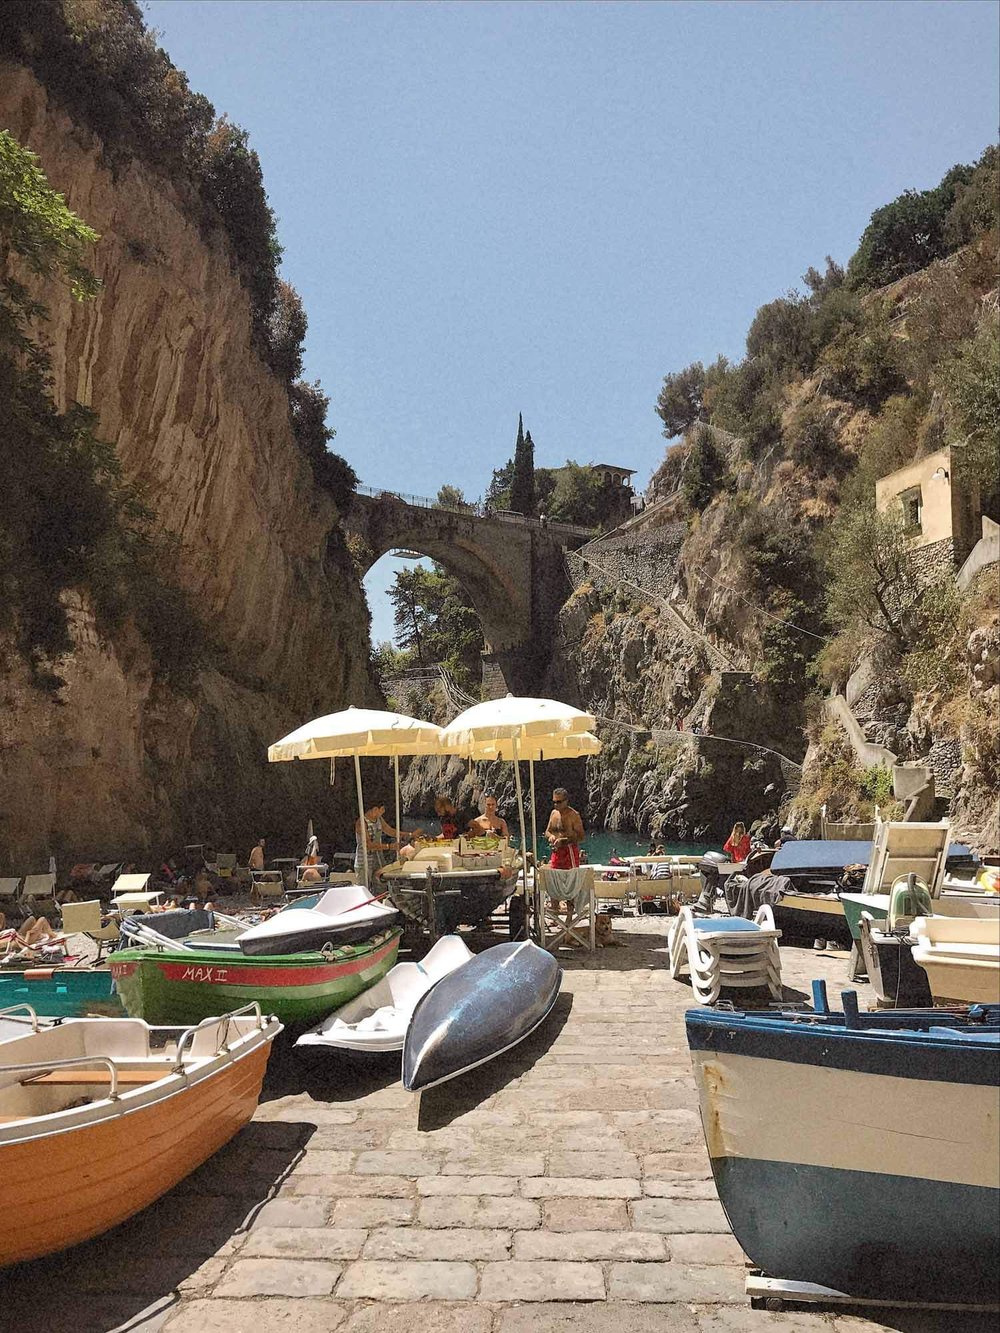 A scooter ride around the Amalfi Coast is one of the best things to do in Positano Italy